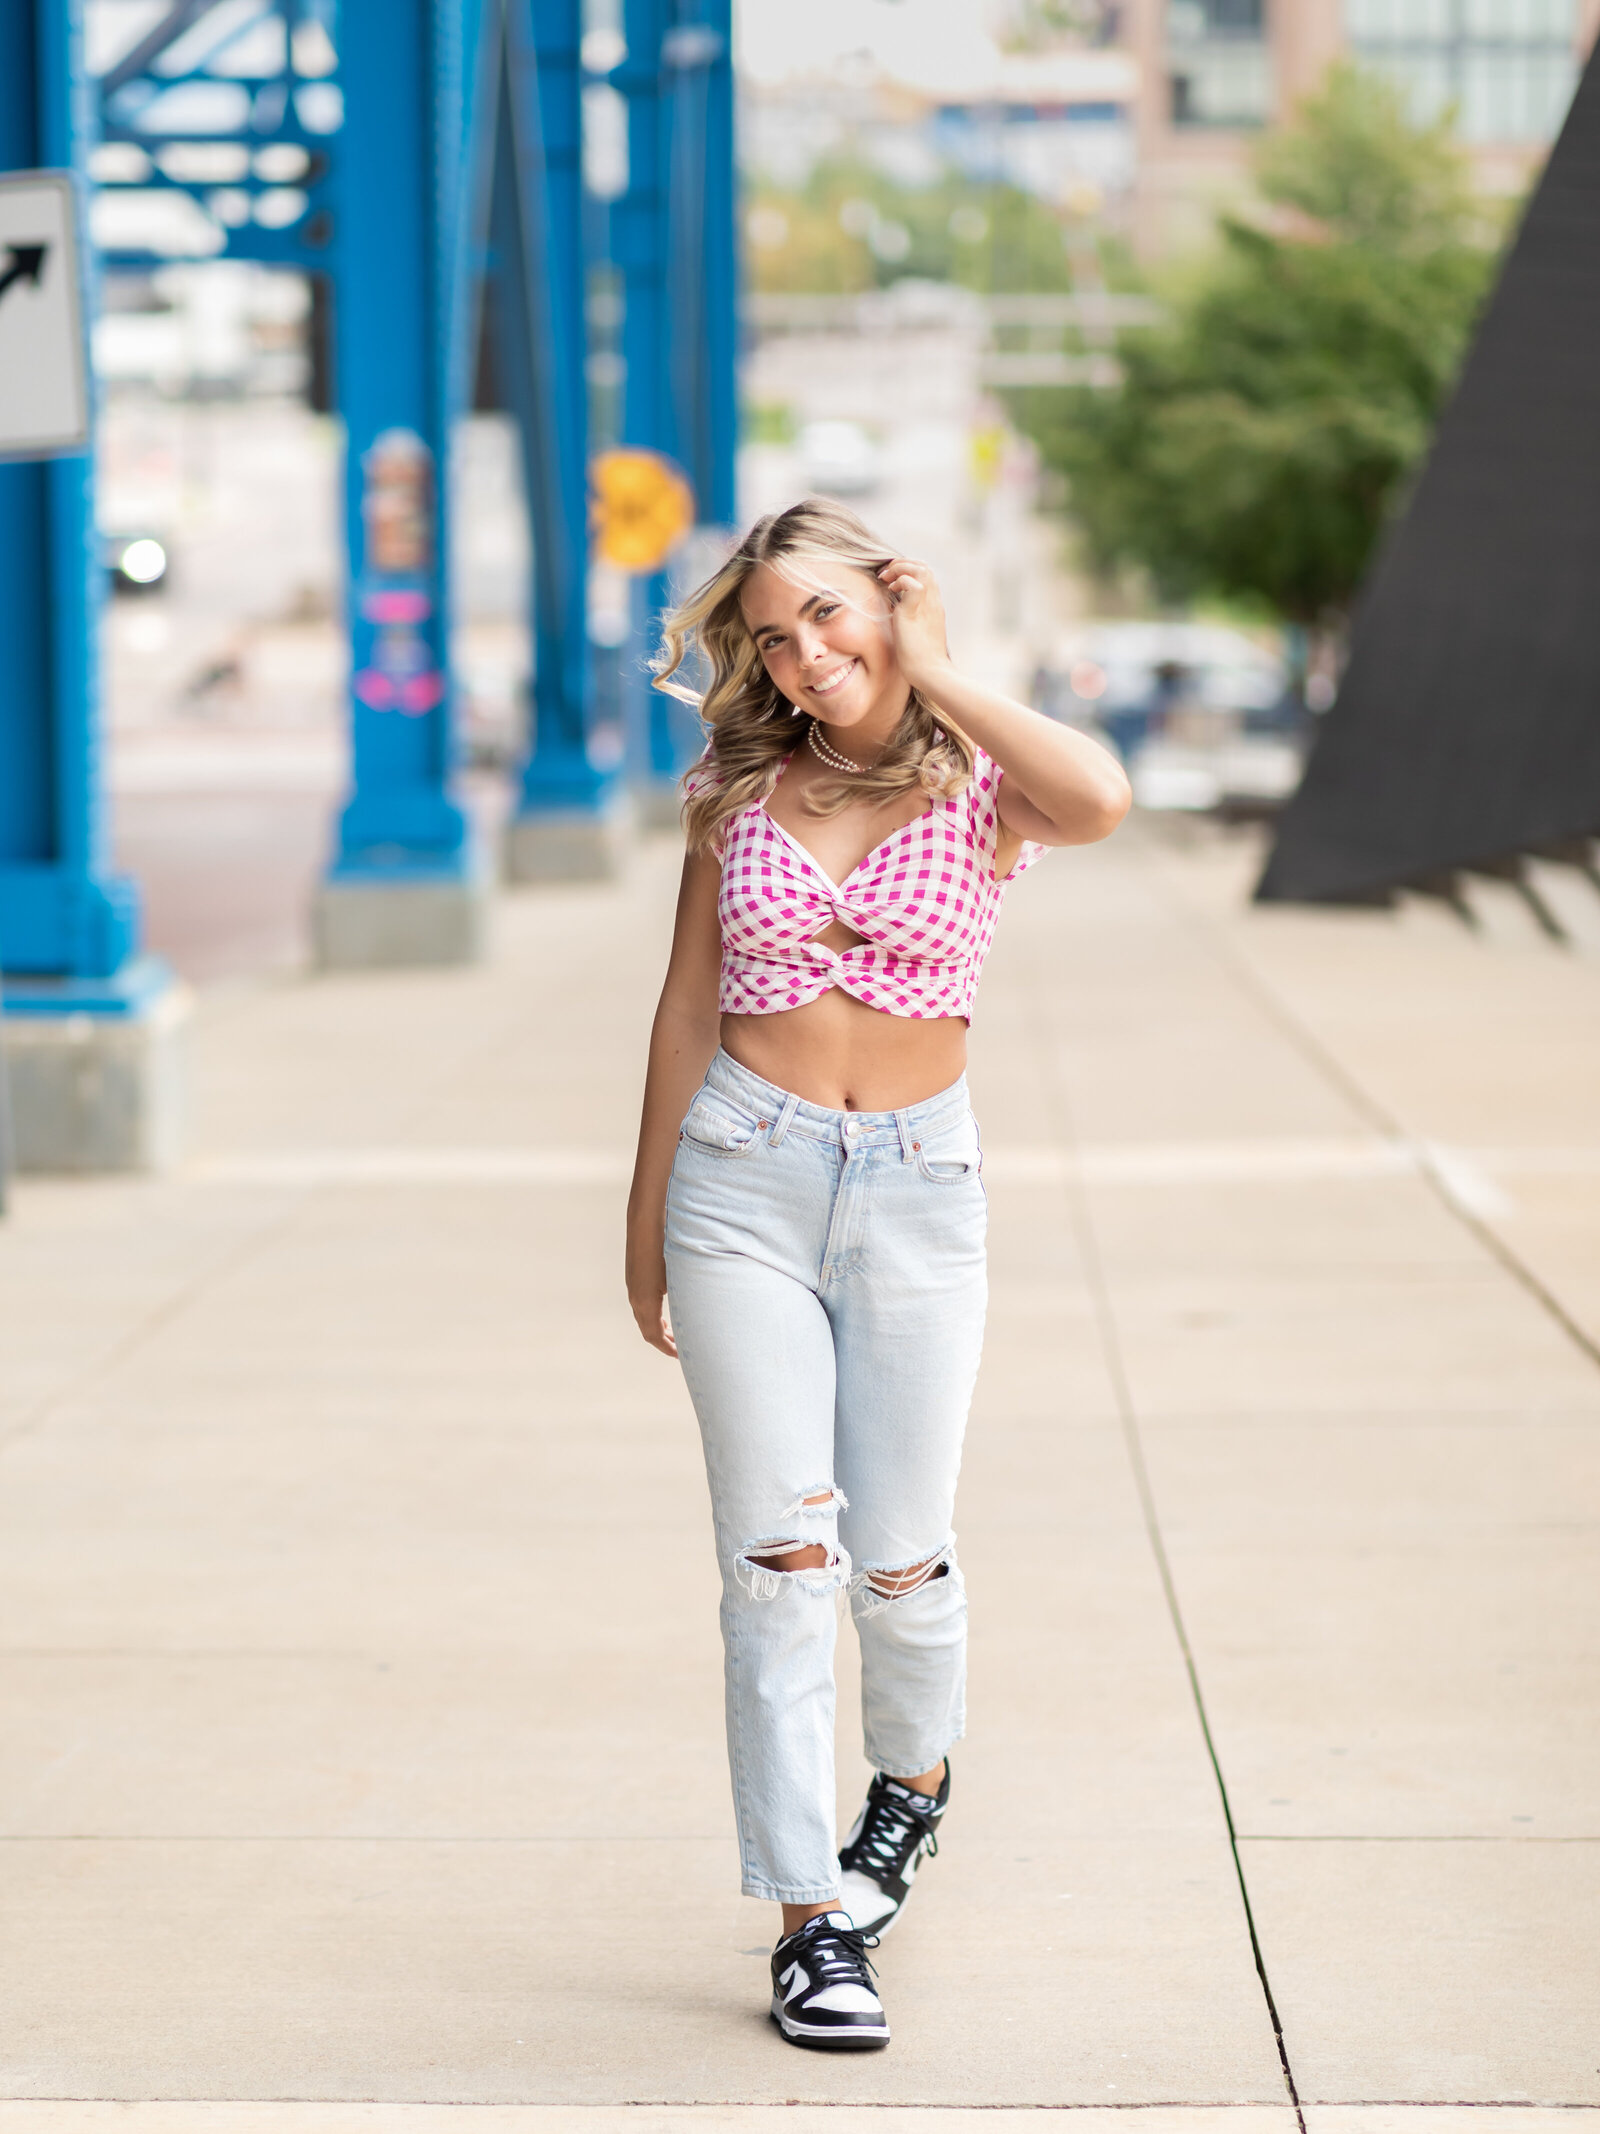 high school senior posing for photos in downtown cleveland